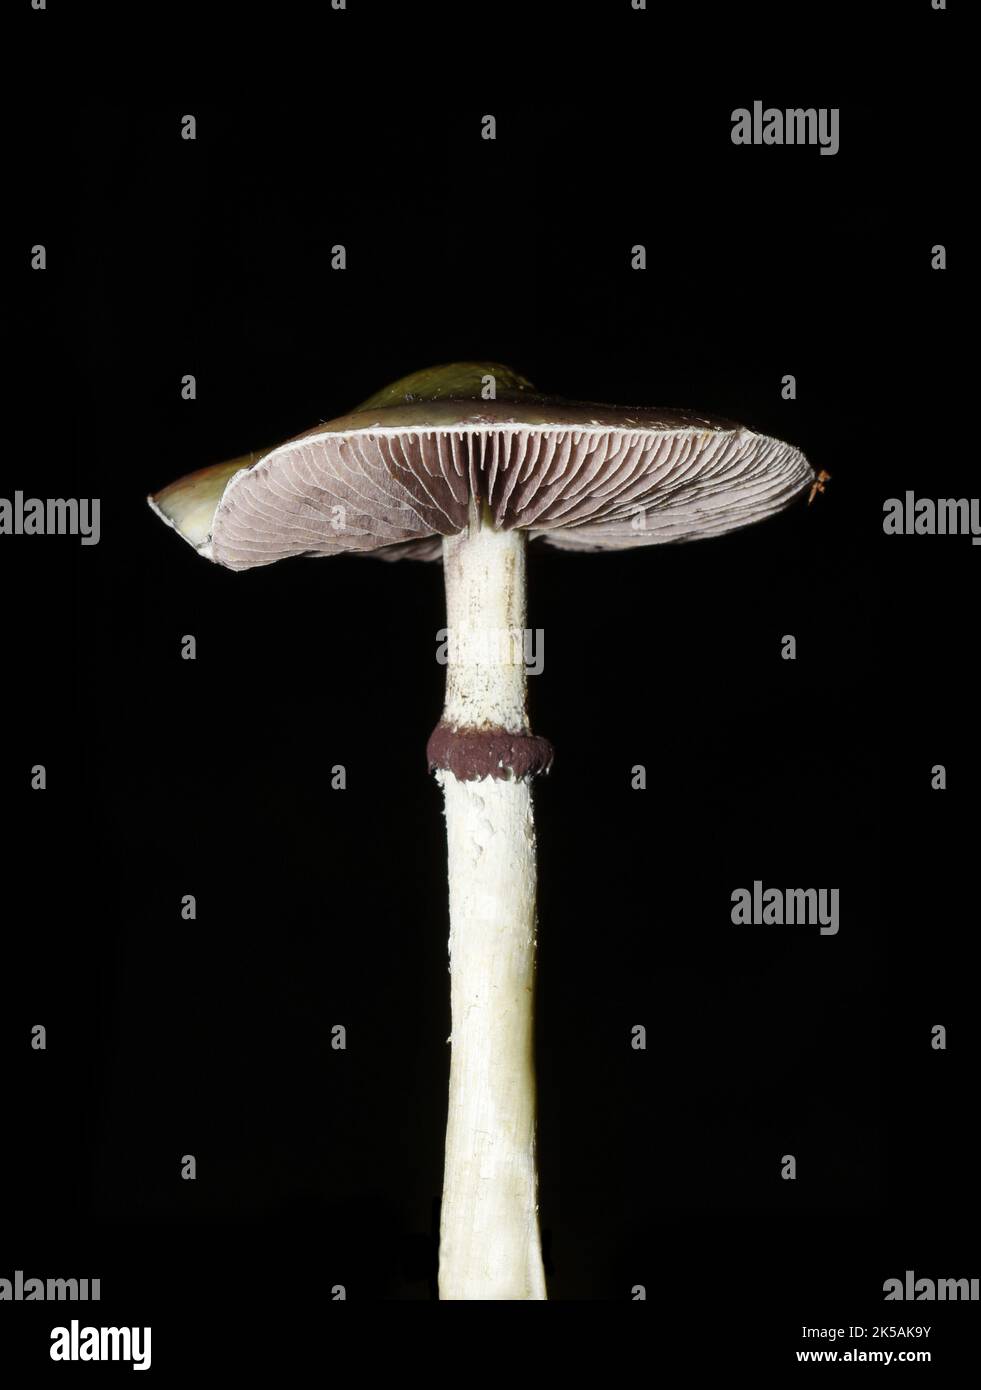 The agaric dung fungus Protostropharia semiglobata on dark background Stock Photo